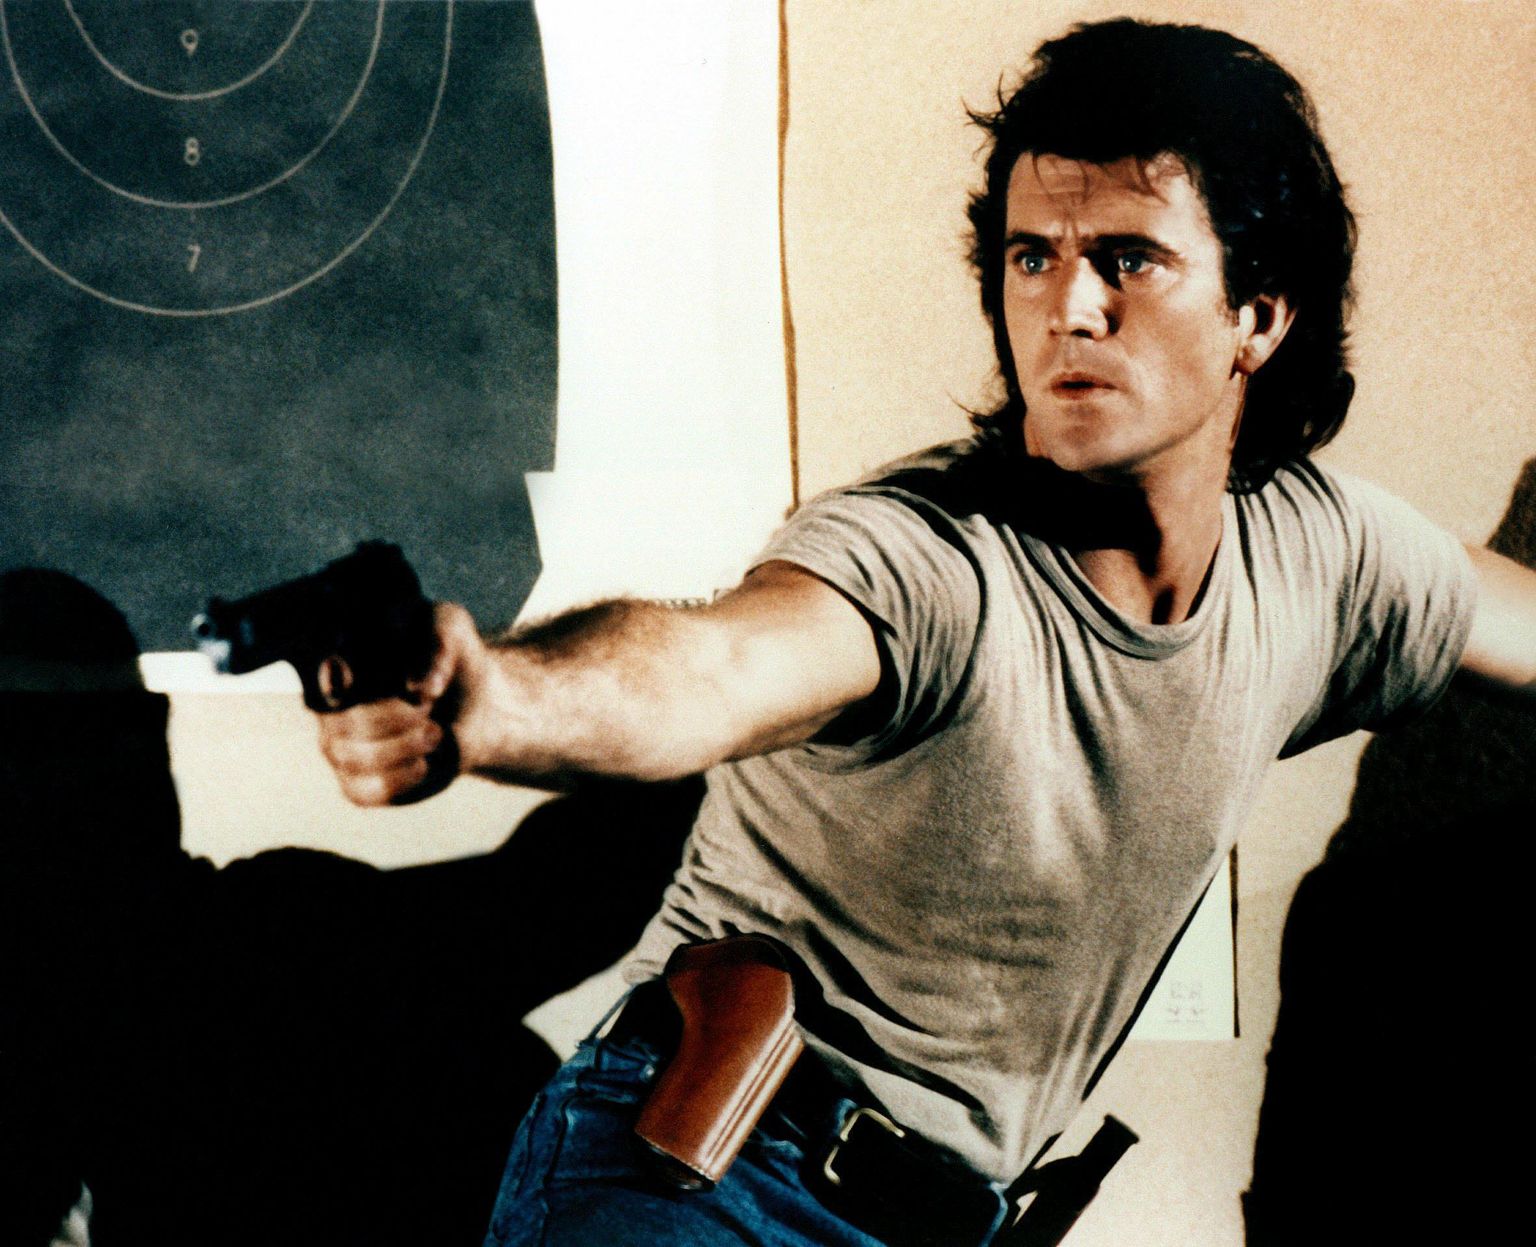 Mel Gibson filmis "Lethal Weapon" (1987)